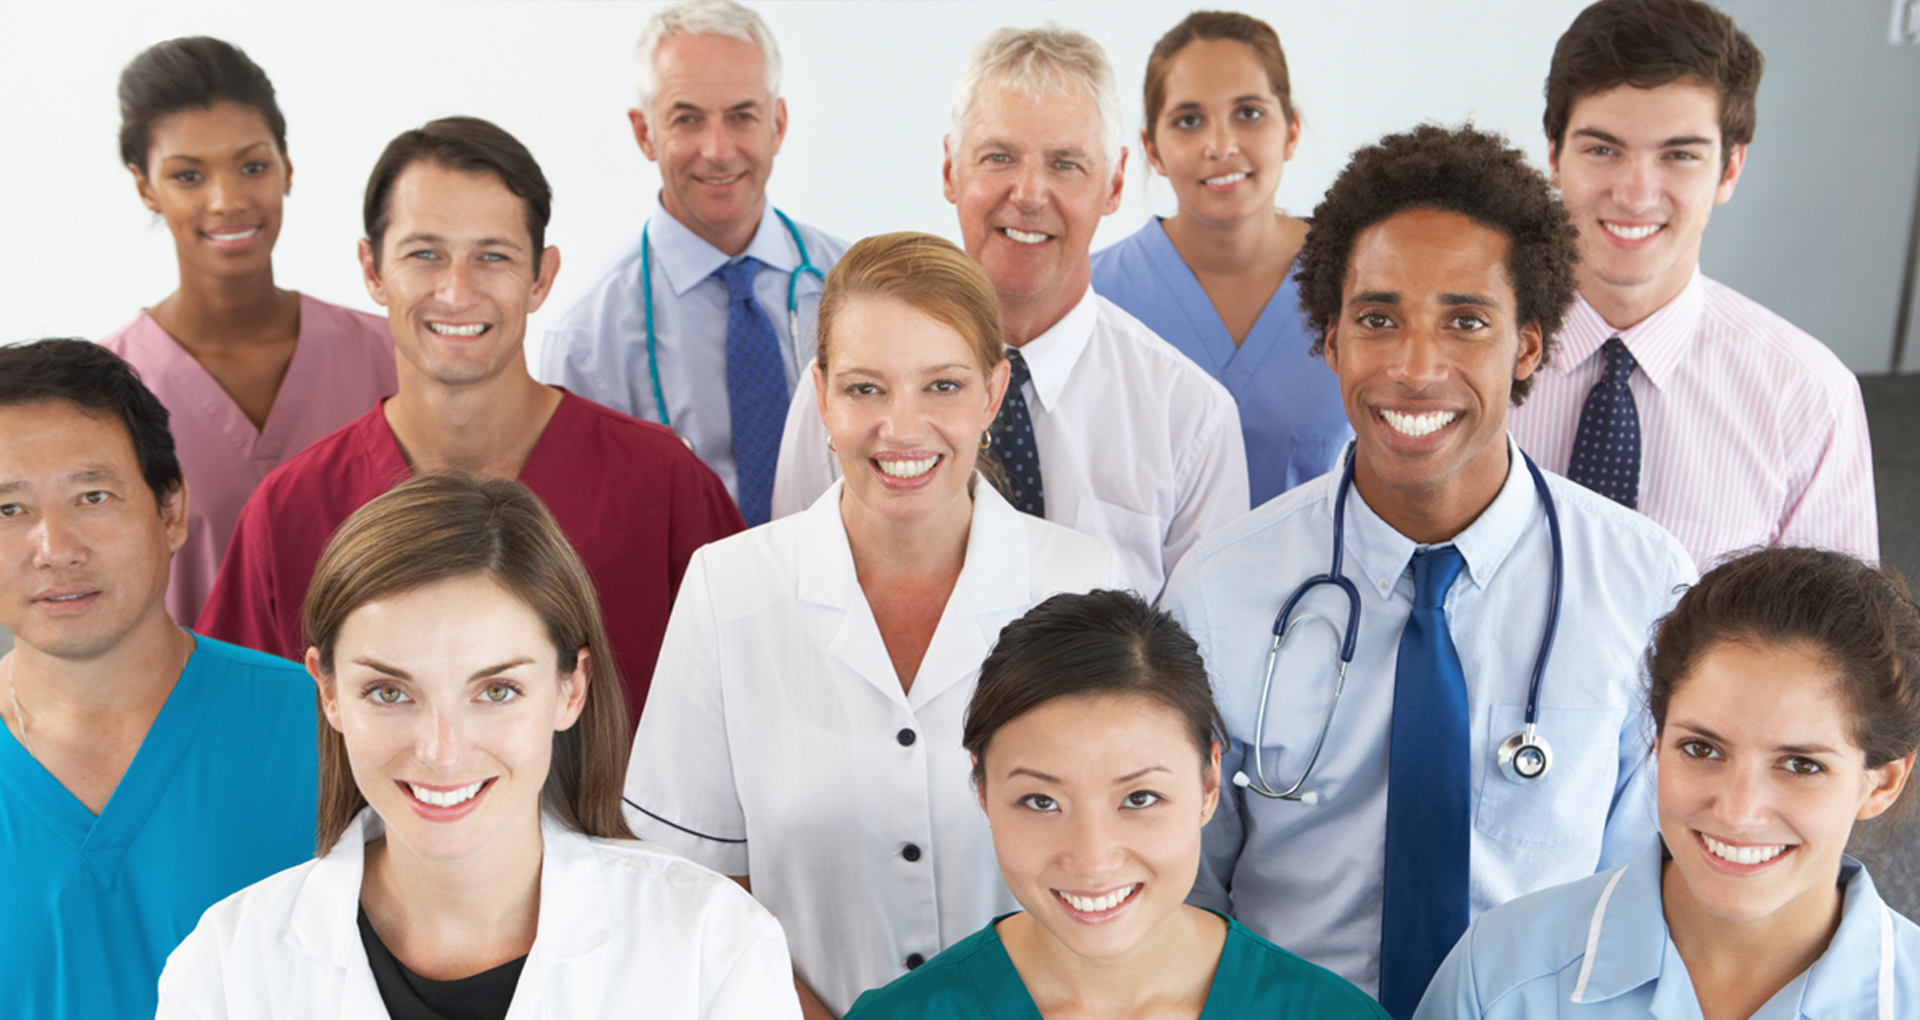 Sourcing Healthcare Professionals “GLOBALLY”